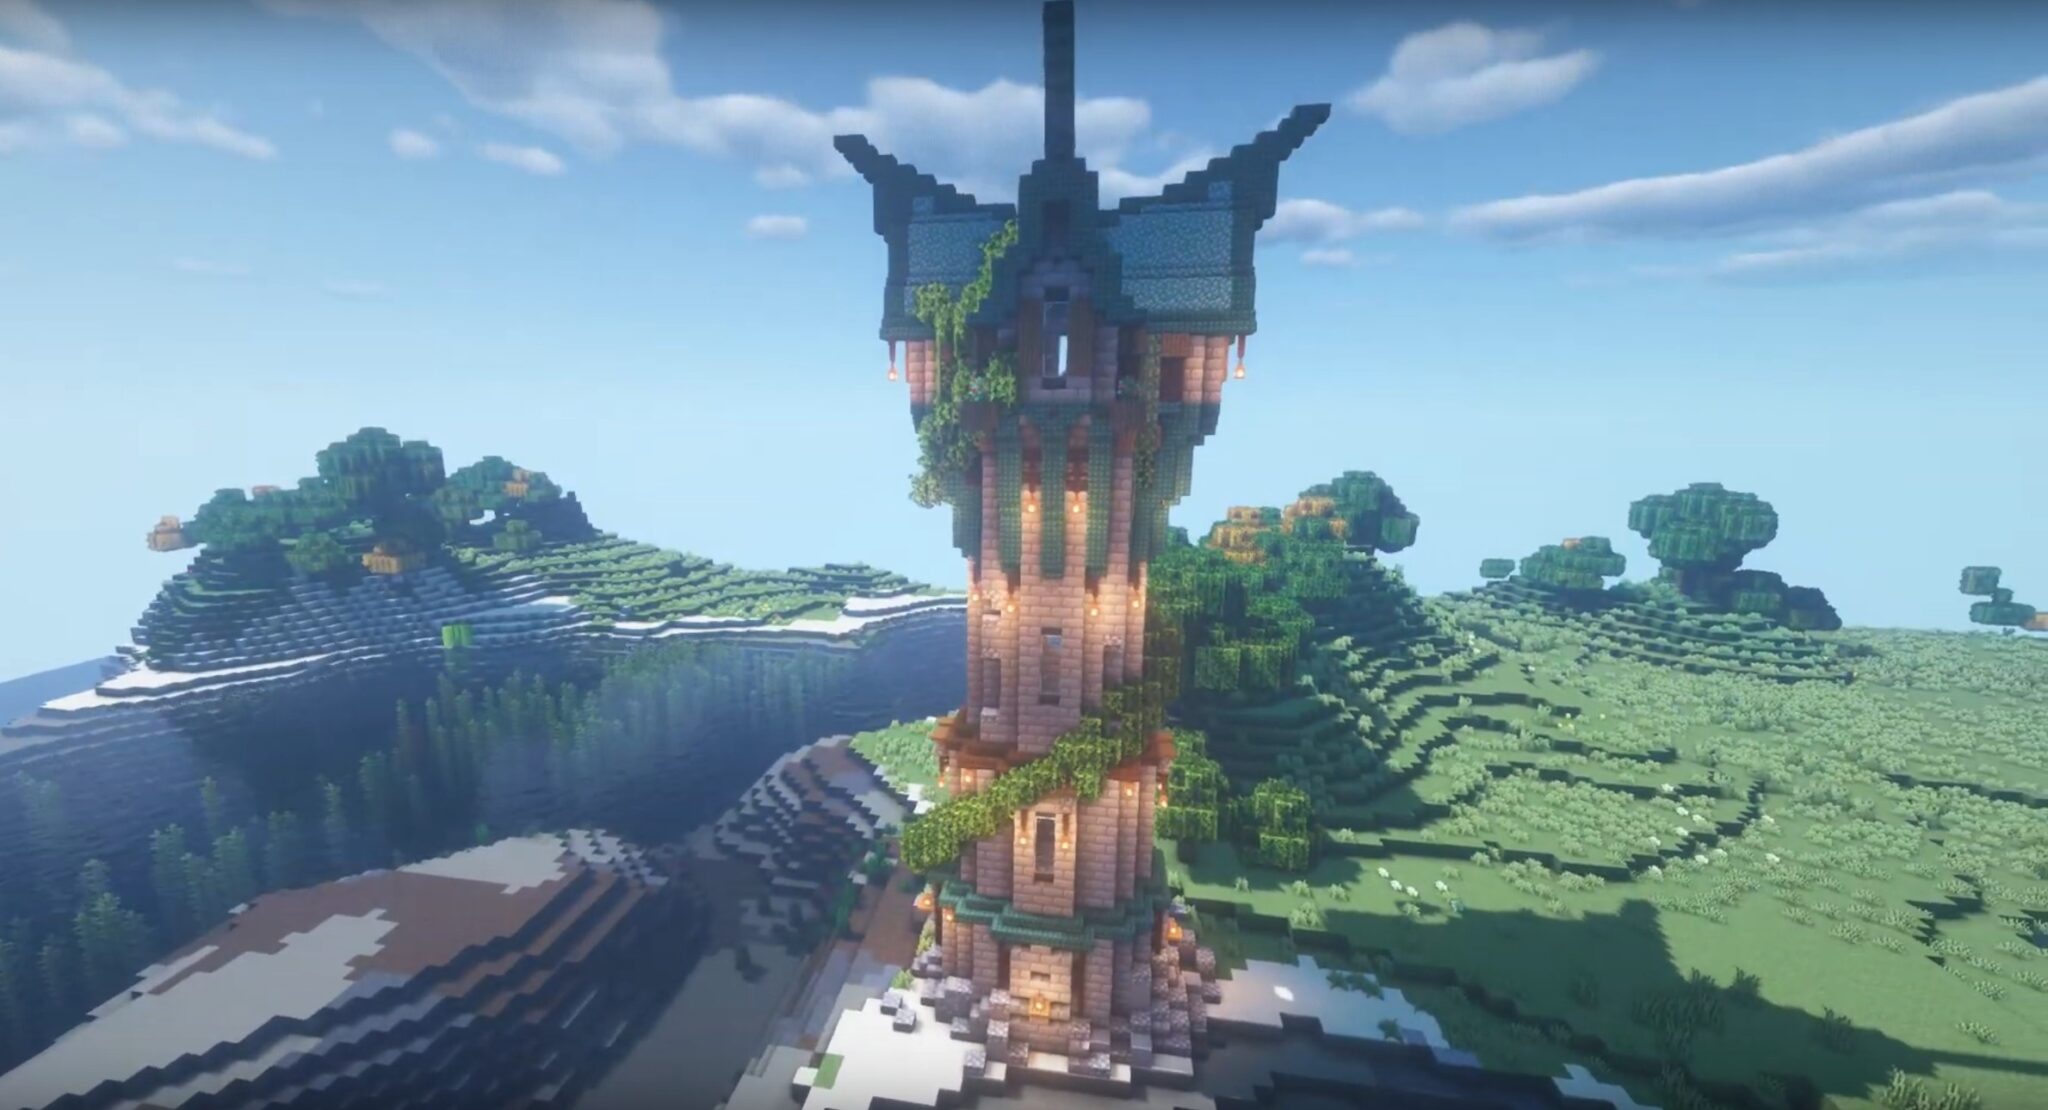 Minecraft Large Enchanting Tower Ideas and Design